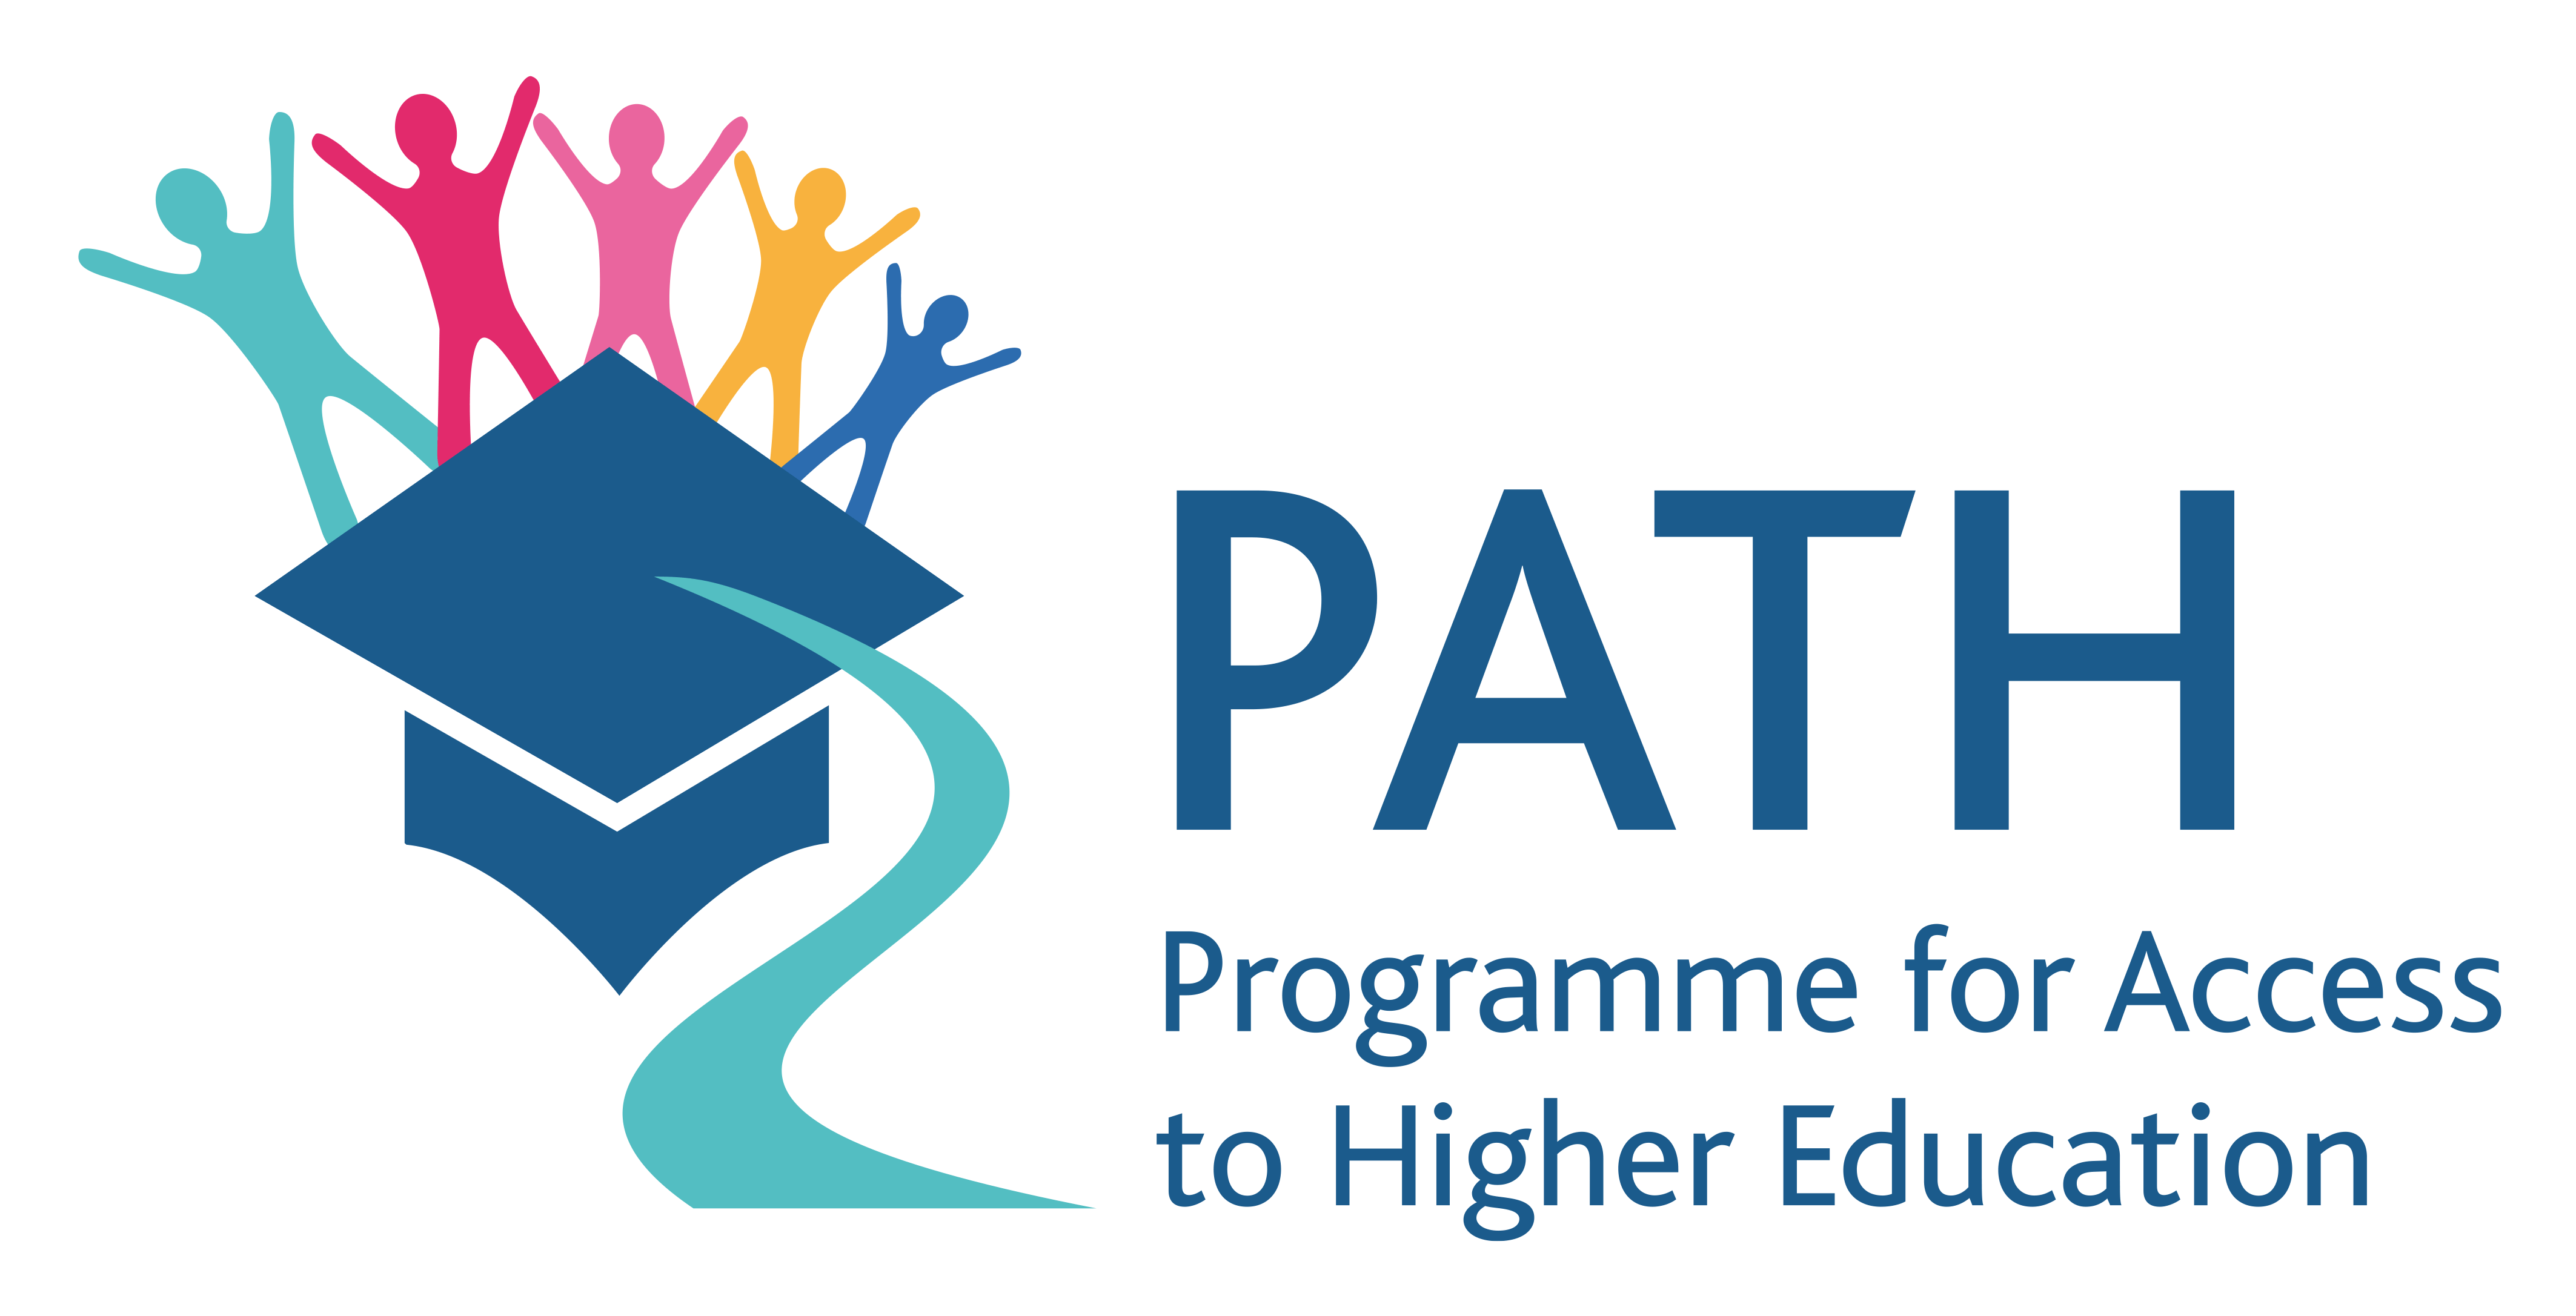 Programme for Access to Higher Education logo